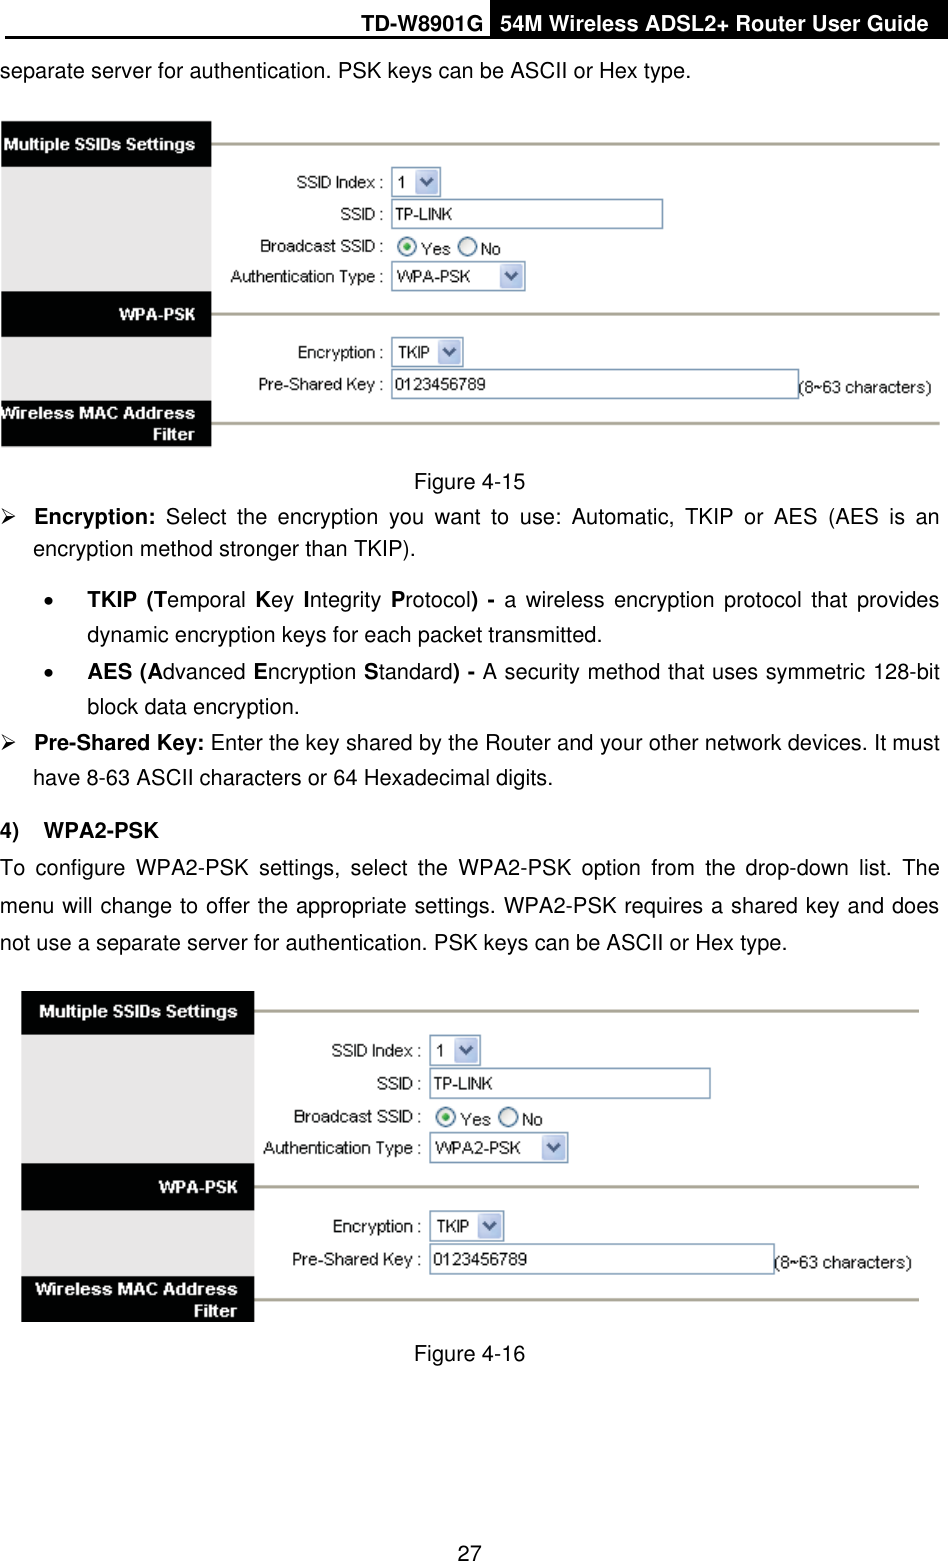 TD-W8901G 54M Wireless ADSL2+ Router User Guide27separate server for authentication. PSK keys can be ASCII or Hex type. Figure 4-15 ¾Encryption:  Select the encryption you want to use: Automatic, TKIP or AES (AES is an encryption method stronger than TKIP). xTKIP (Temporal Key Integrity Protocol) - a wireless encryption protocol that provides dynamic encryption keys for each packet transmitted. xAES (Advanced Encryption Standard) - A security method that uses symmetric 128-bit block data encryption. ¾Pre-Shared Key: Enter the key shared by the Router and your other network devices. It must have 8-63 ASCII characters or 64 Hexadecimal digits. 4) WPA2-PSK To configure WPA2-PSK settings, select the WPA2-PSK option from the drop-down list. The menu will change to offer the appropriate settings. WPA2-PSK requires a shared key and does not use a separate server for authentication. PSK keys can be ASCII or Hex type. Figure 4-16 